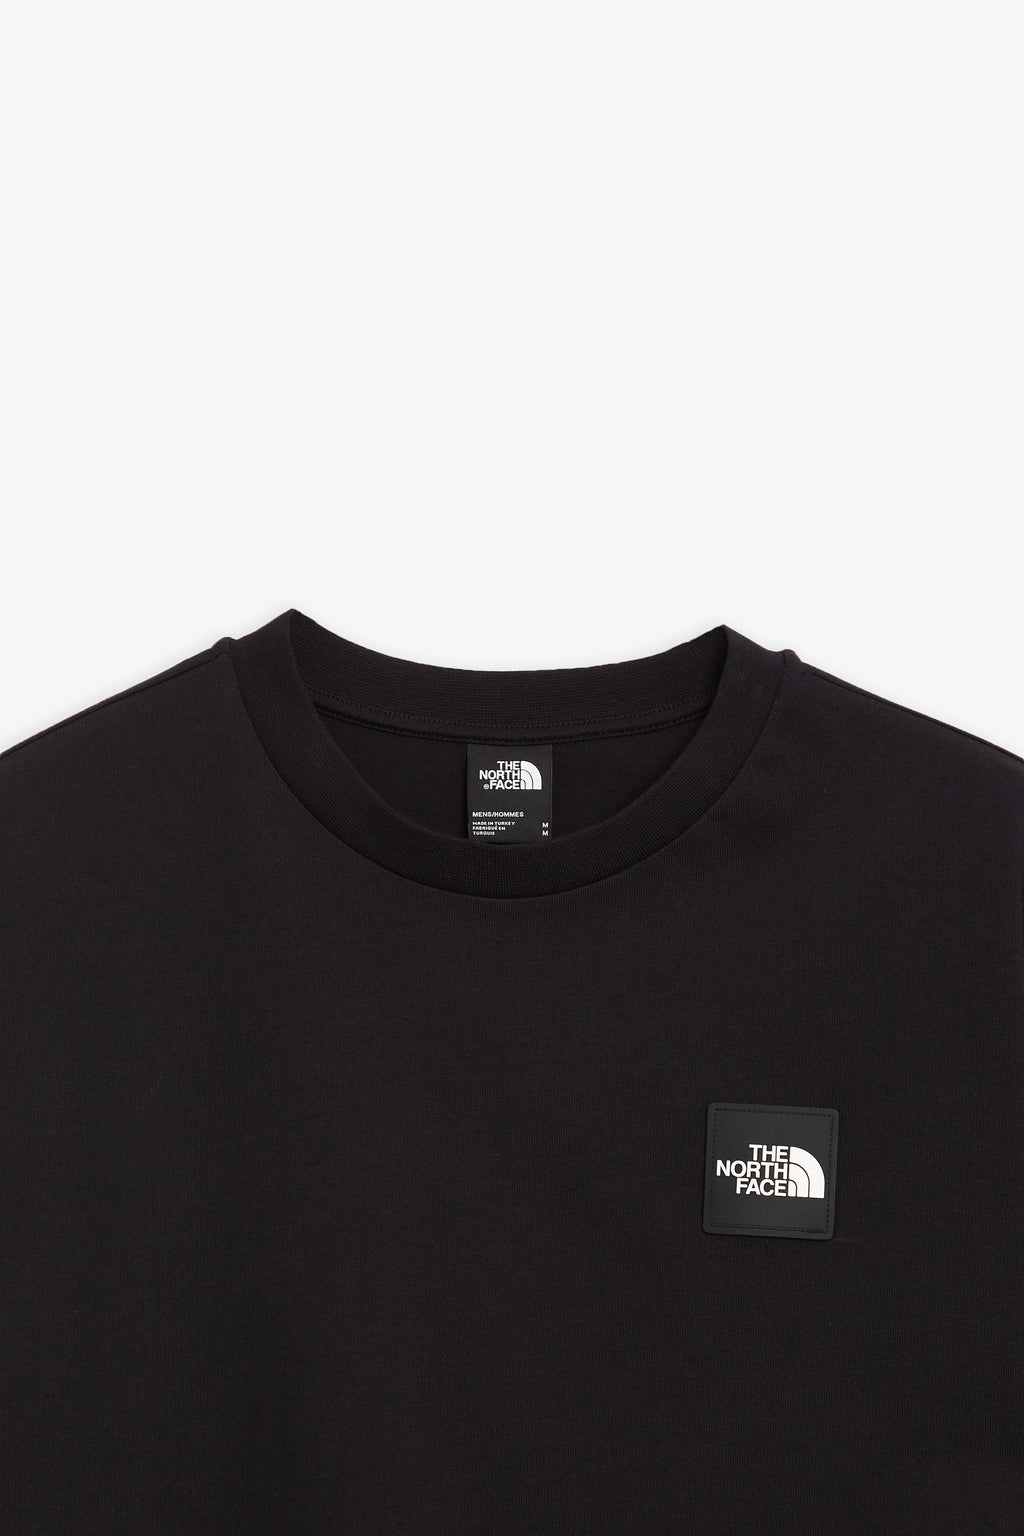 alt-image__Black-cotton-oversize-t-shirt-with-chest-logo---NSE-Patch-S/S-Tee-